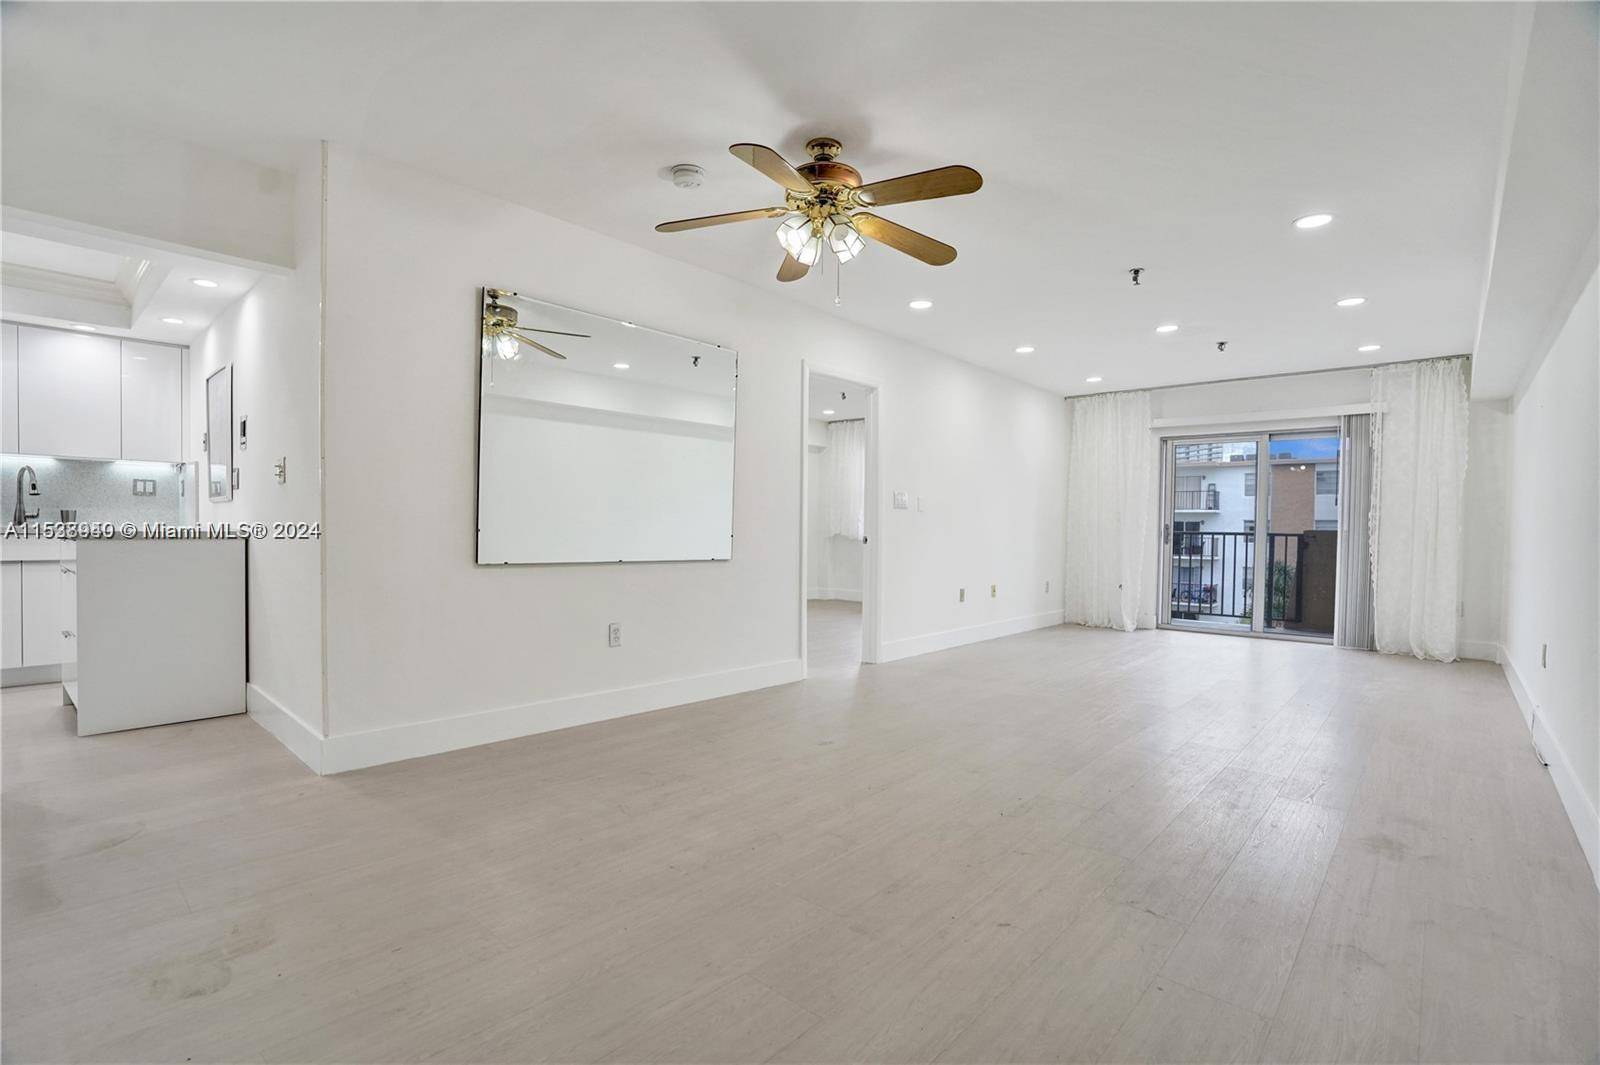 Step into coastal luxury with this recently renovated 1 Bed, 1 1 2 Bath gem in Sunny Isles Beach.